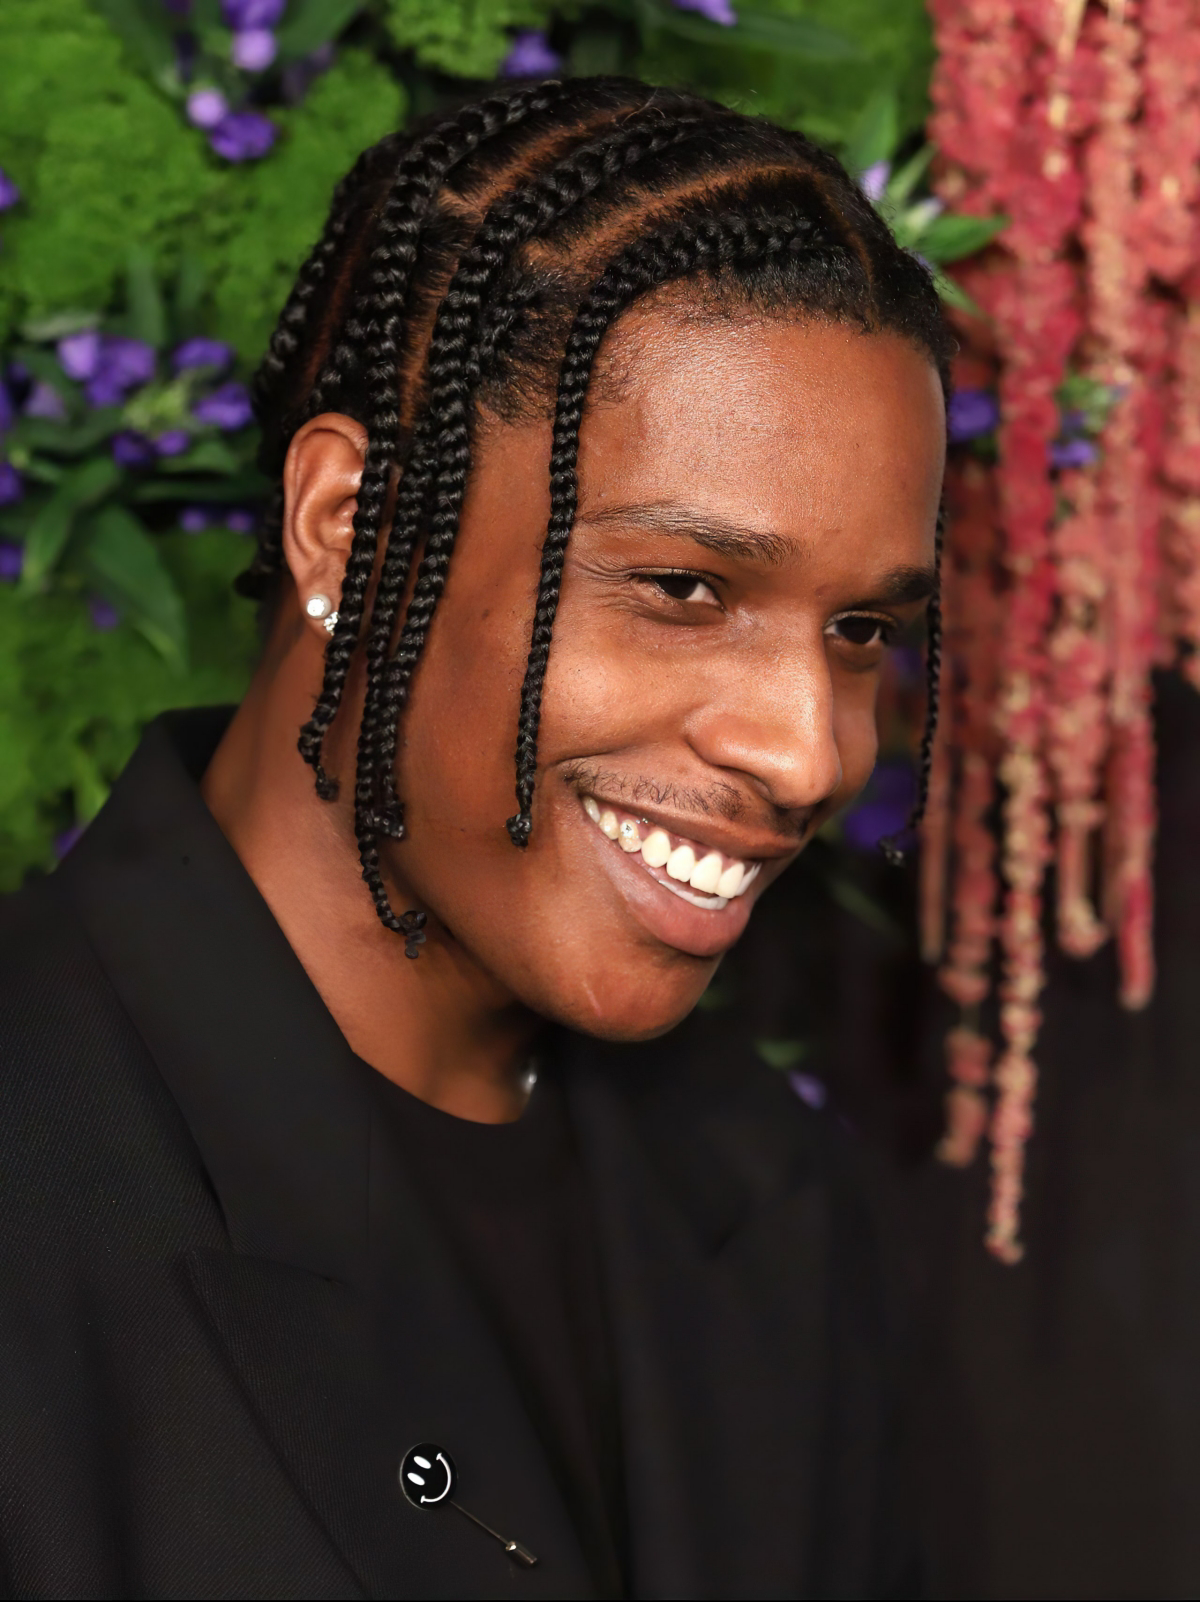 different types of braids for men